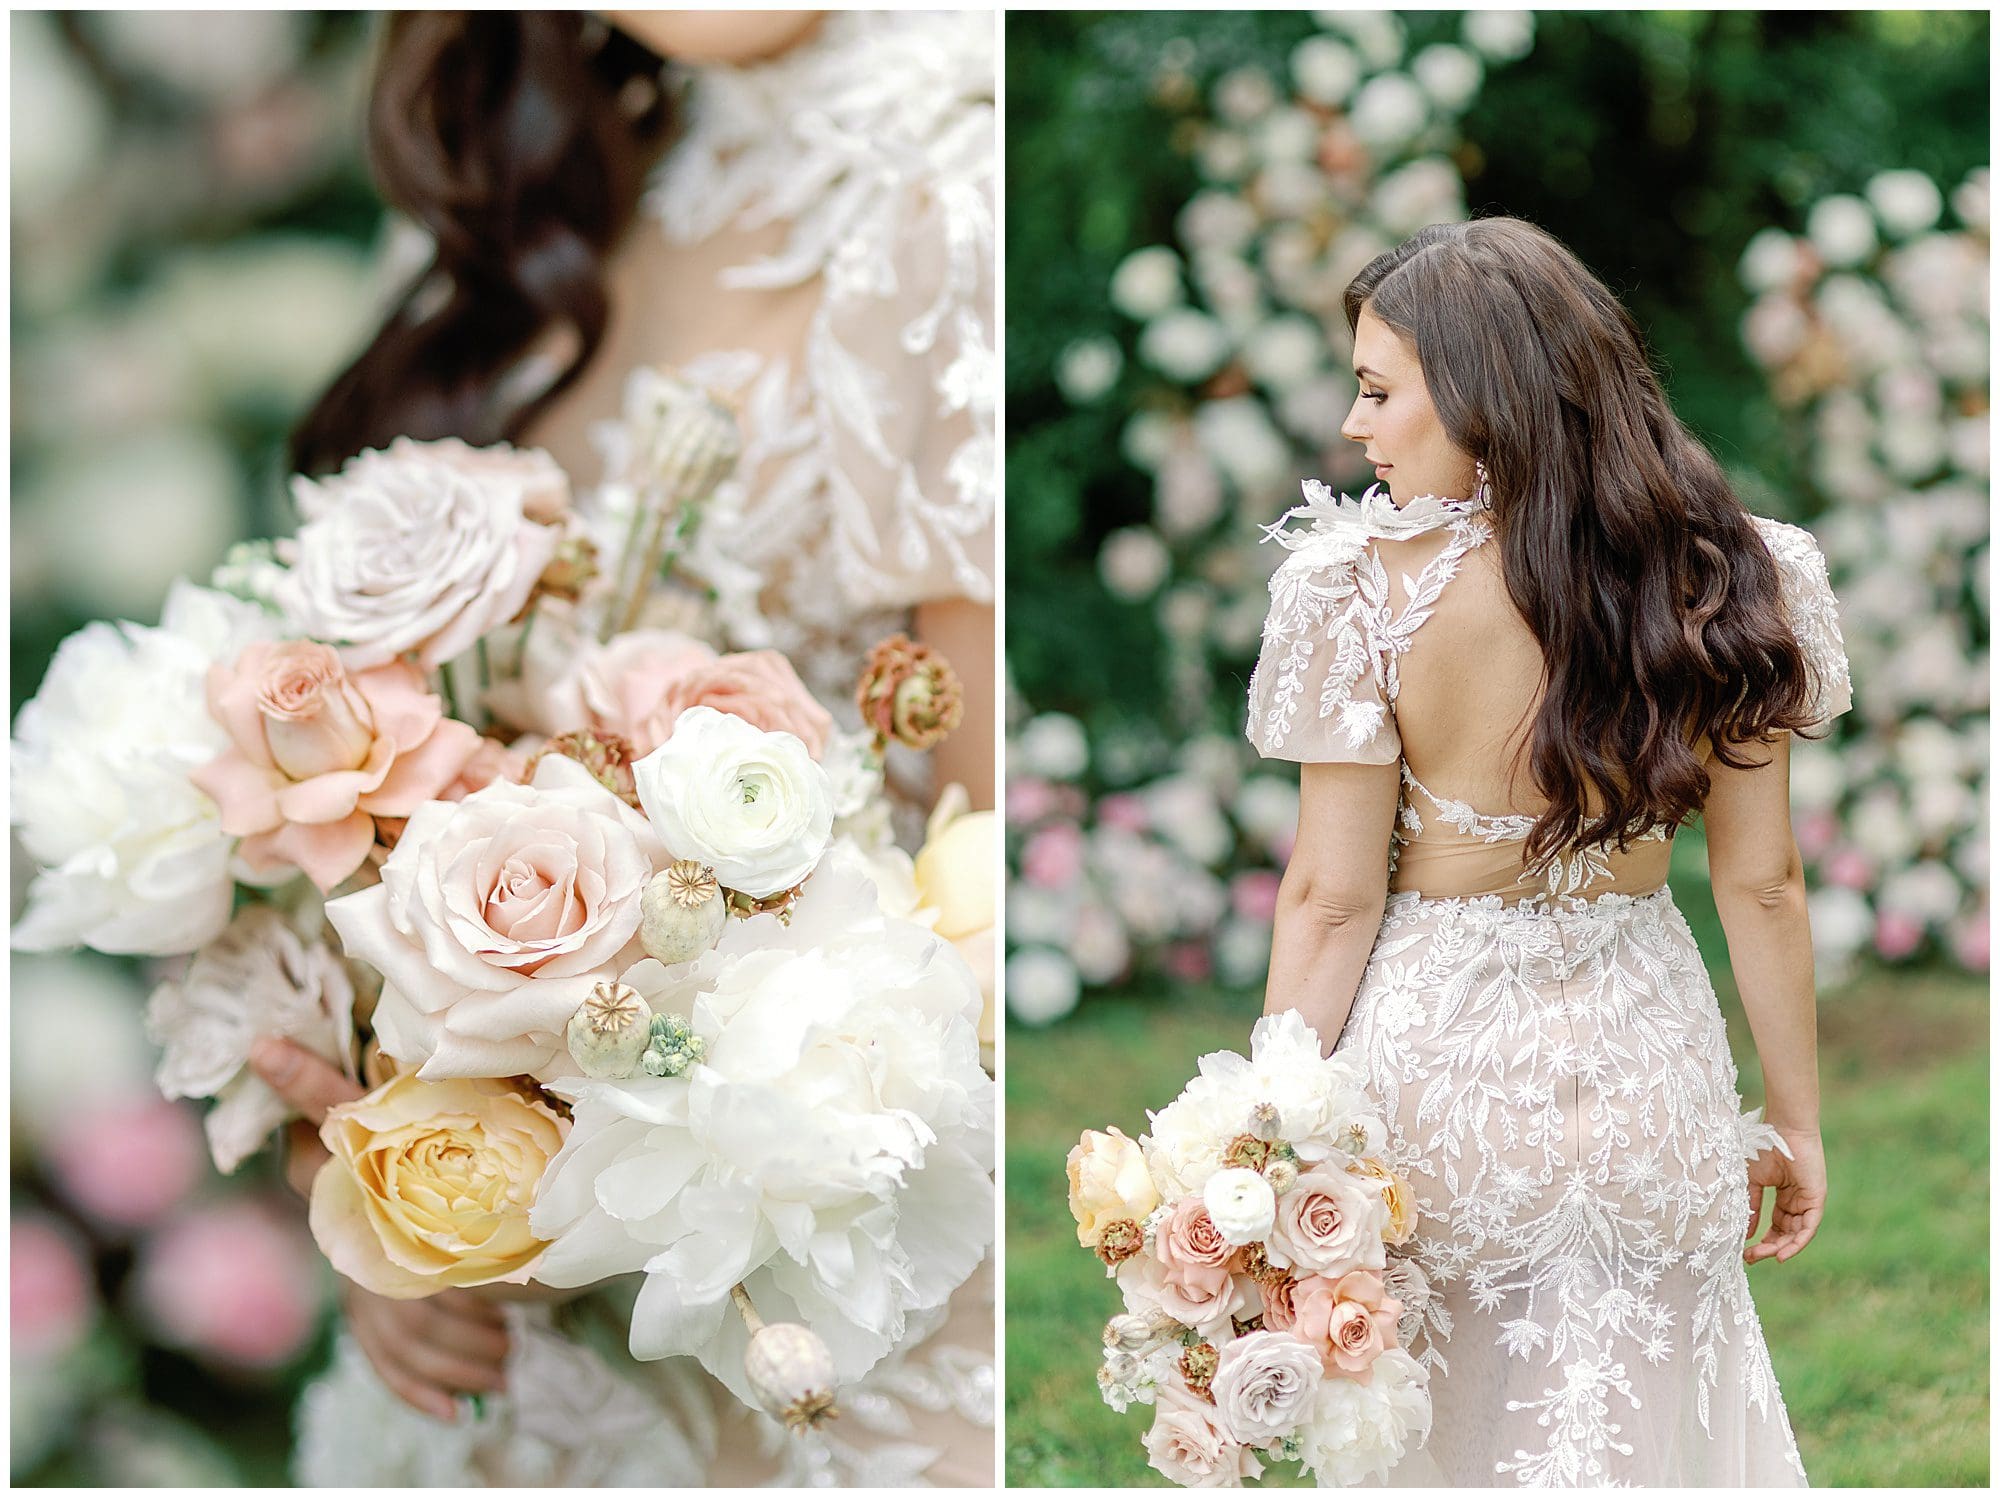 A bride in a wedding dress holding a bouquet of flowers.